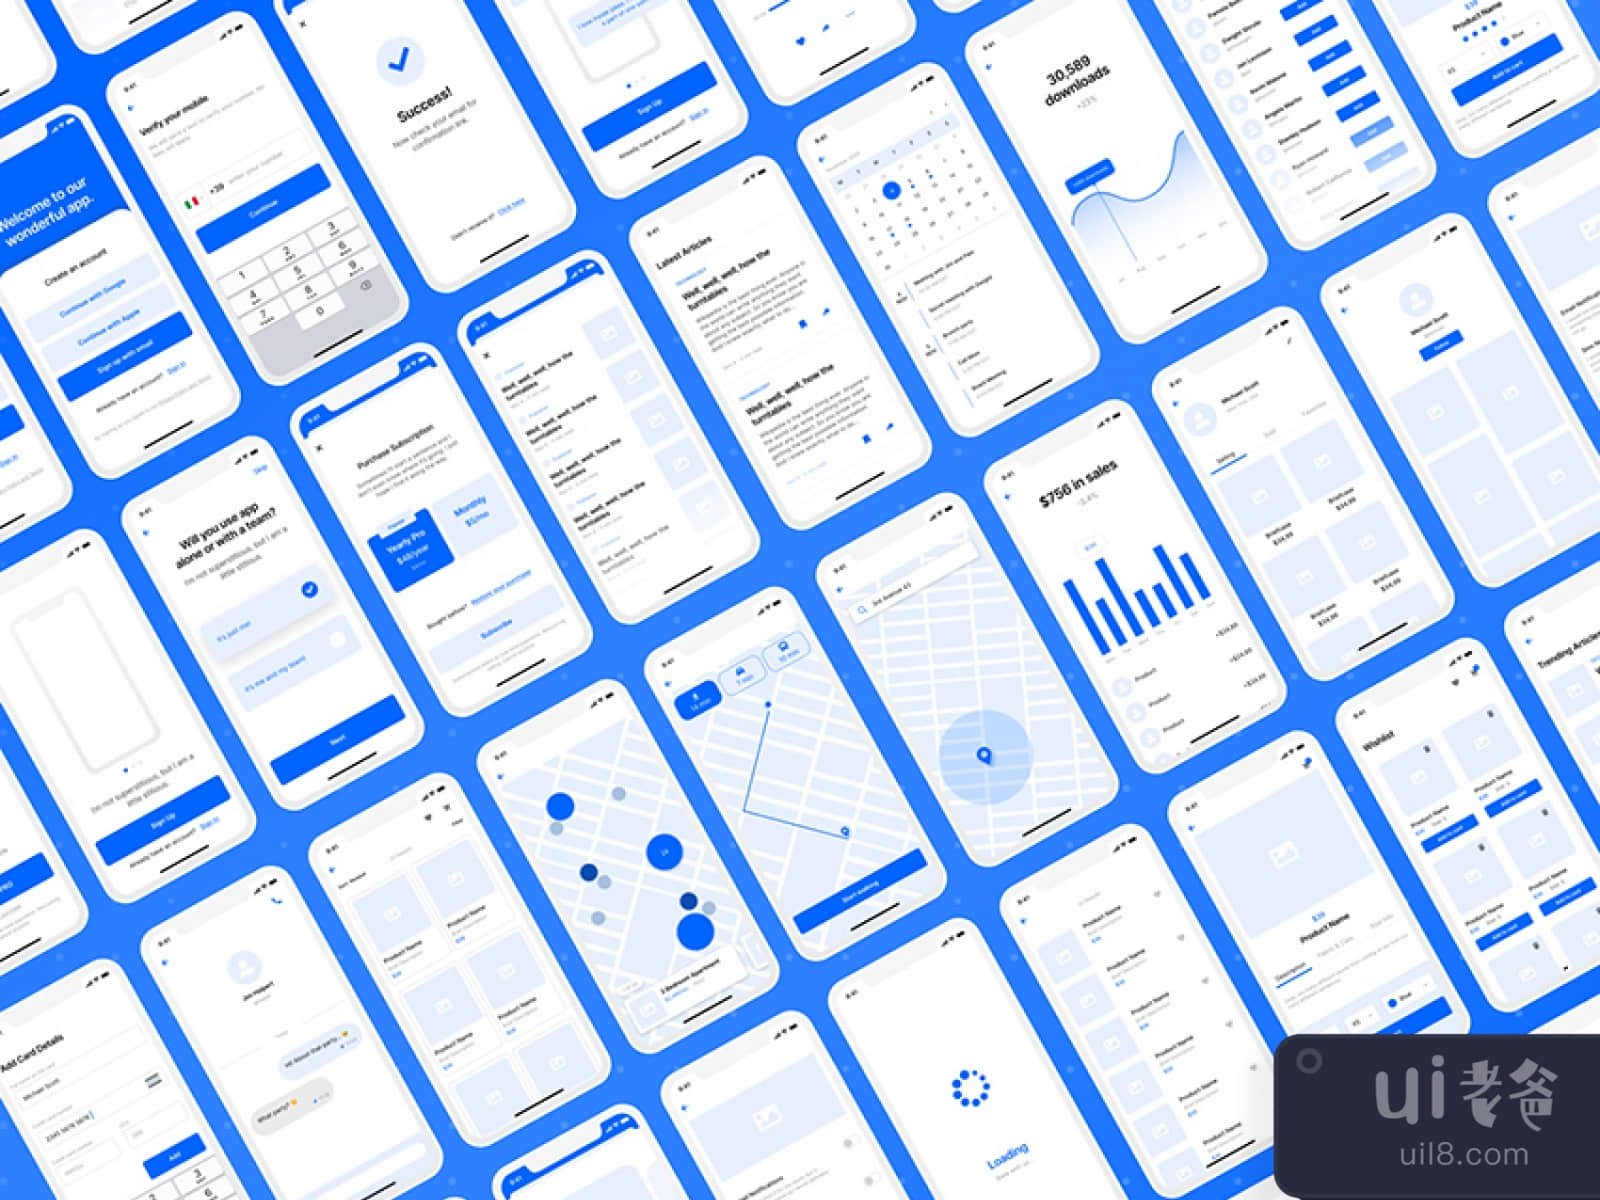 Wireframe Kit for iOS Apps for Figma and Adobe XD No 1